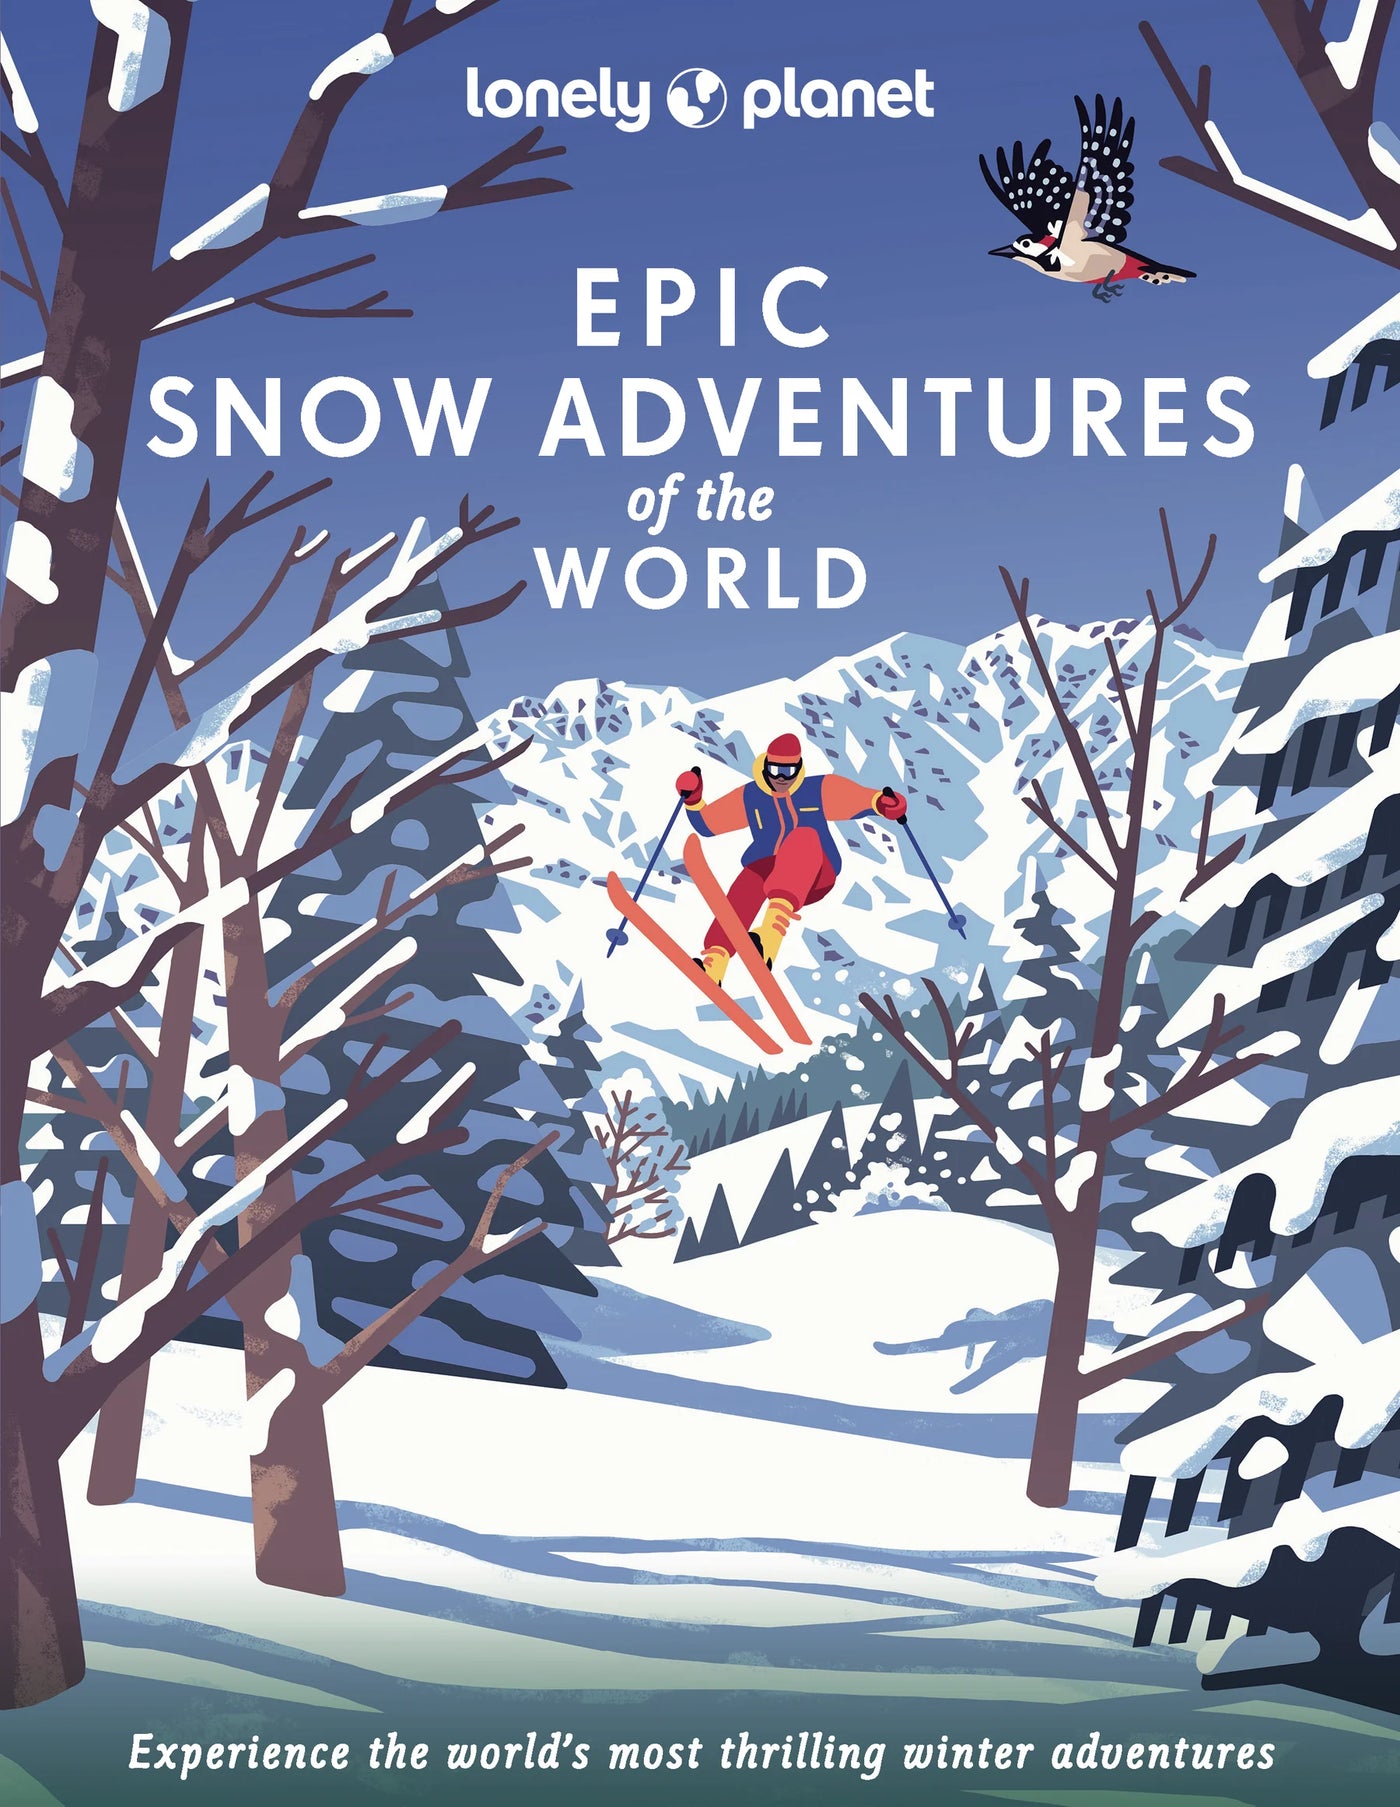 epic-snow-adventures-lonely-planet-book-cover